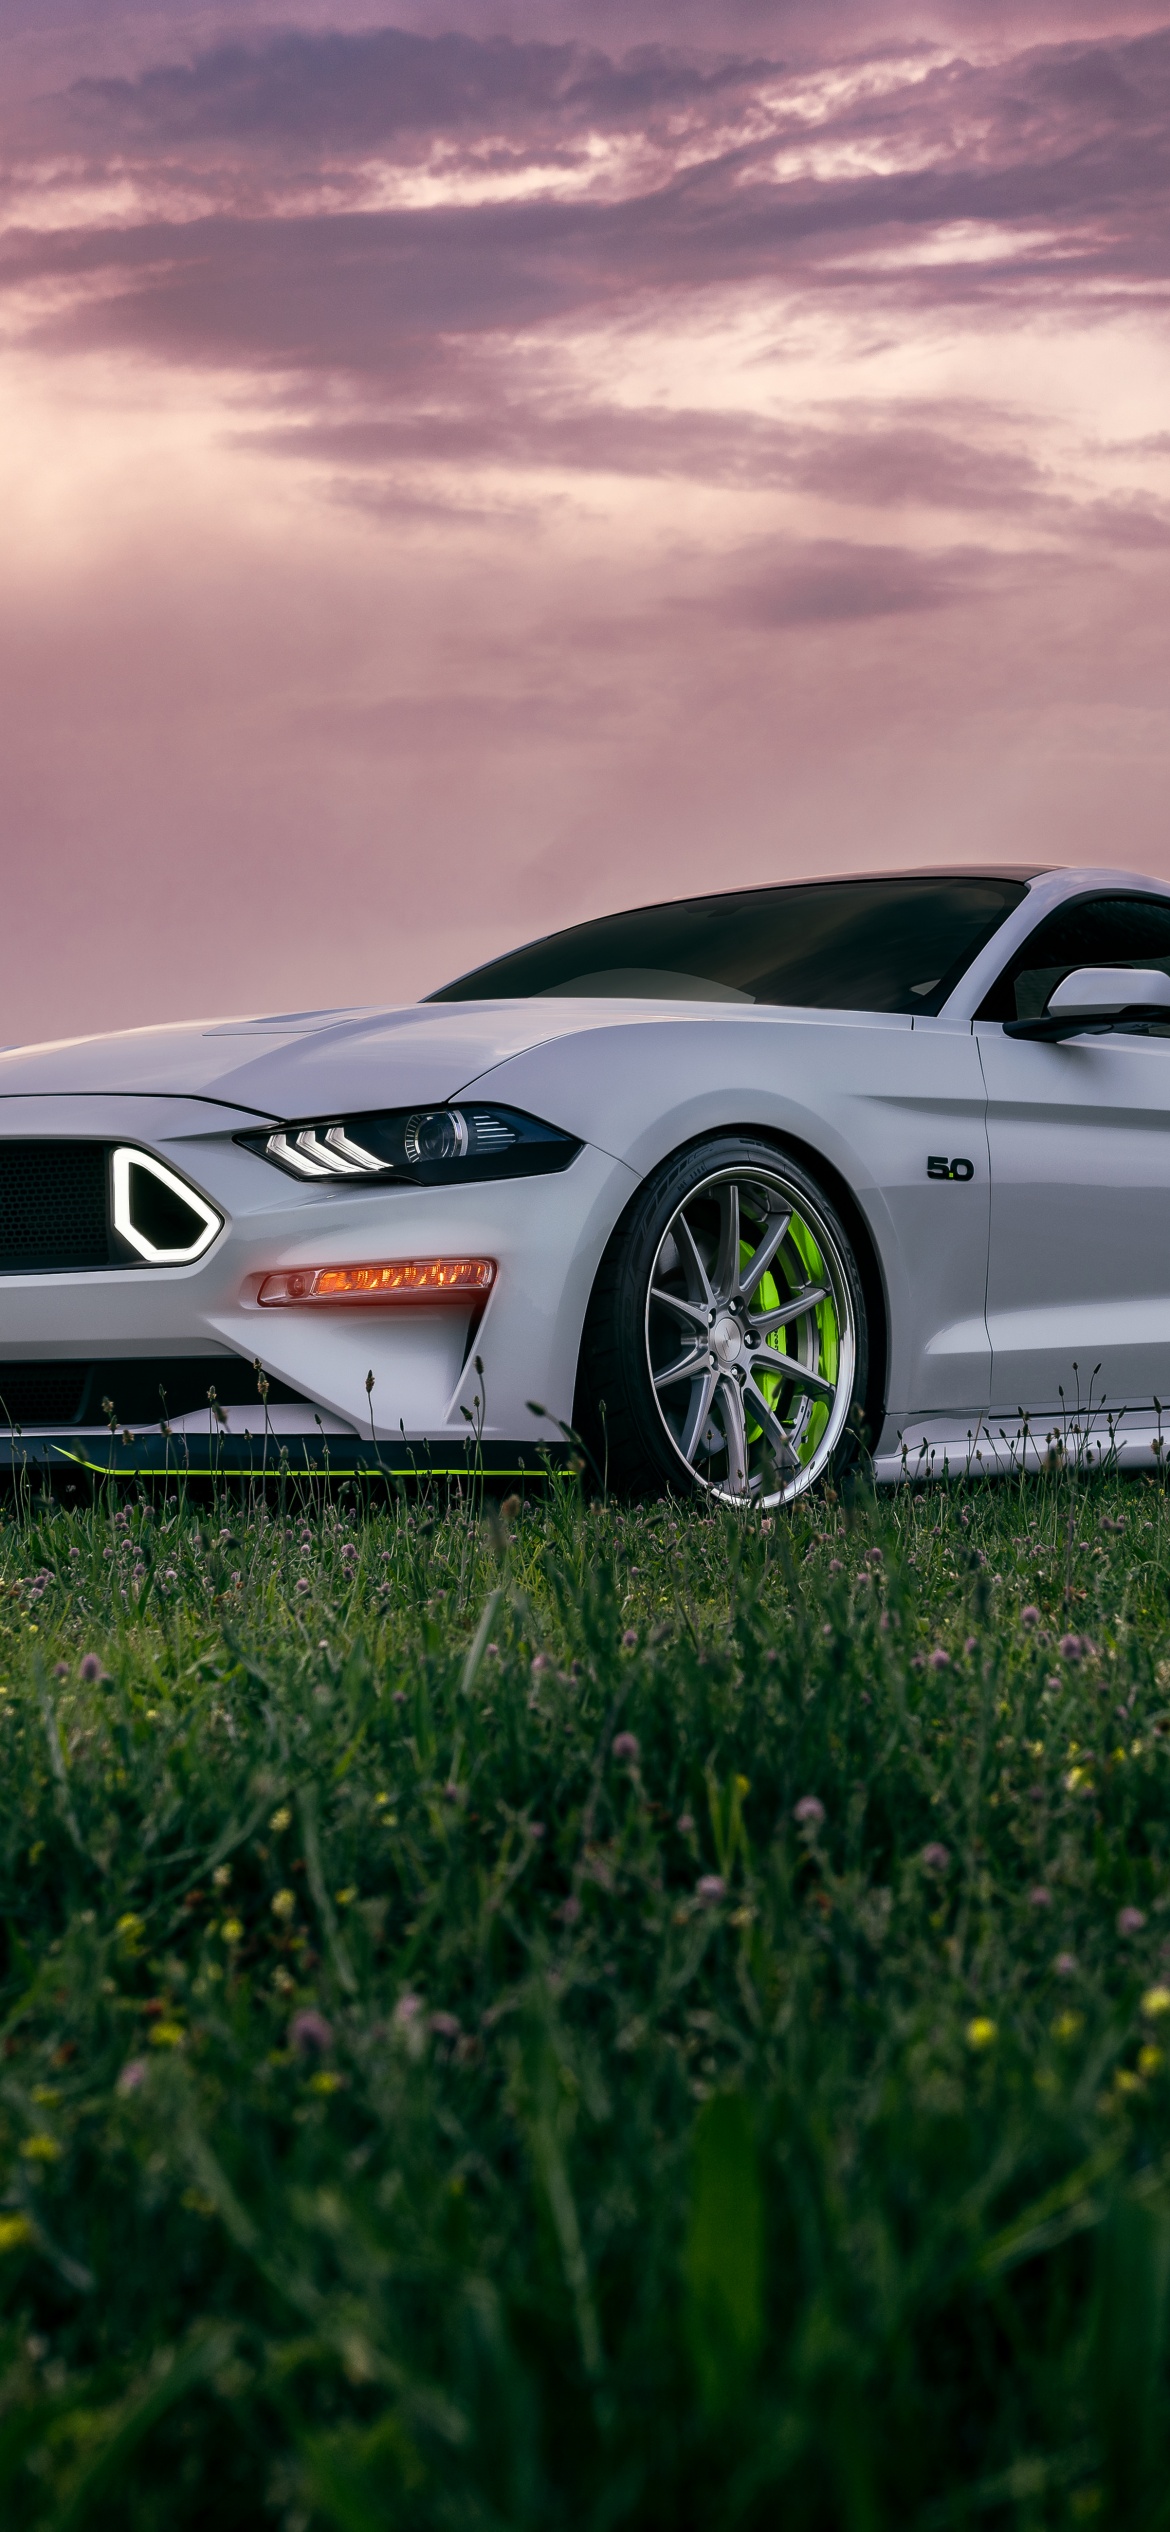 Mustang Photos, Download The BEST Free Mustang Stock Photos & HD Images